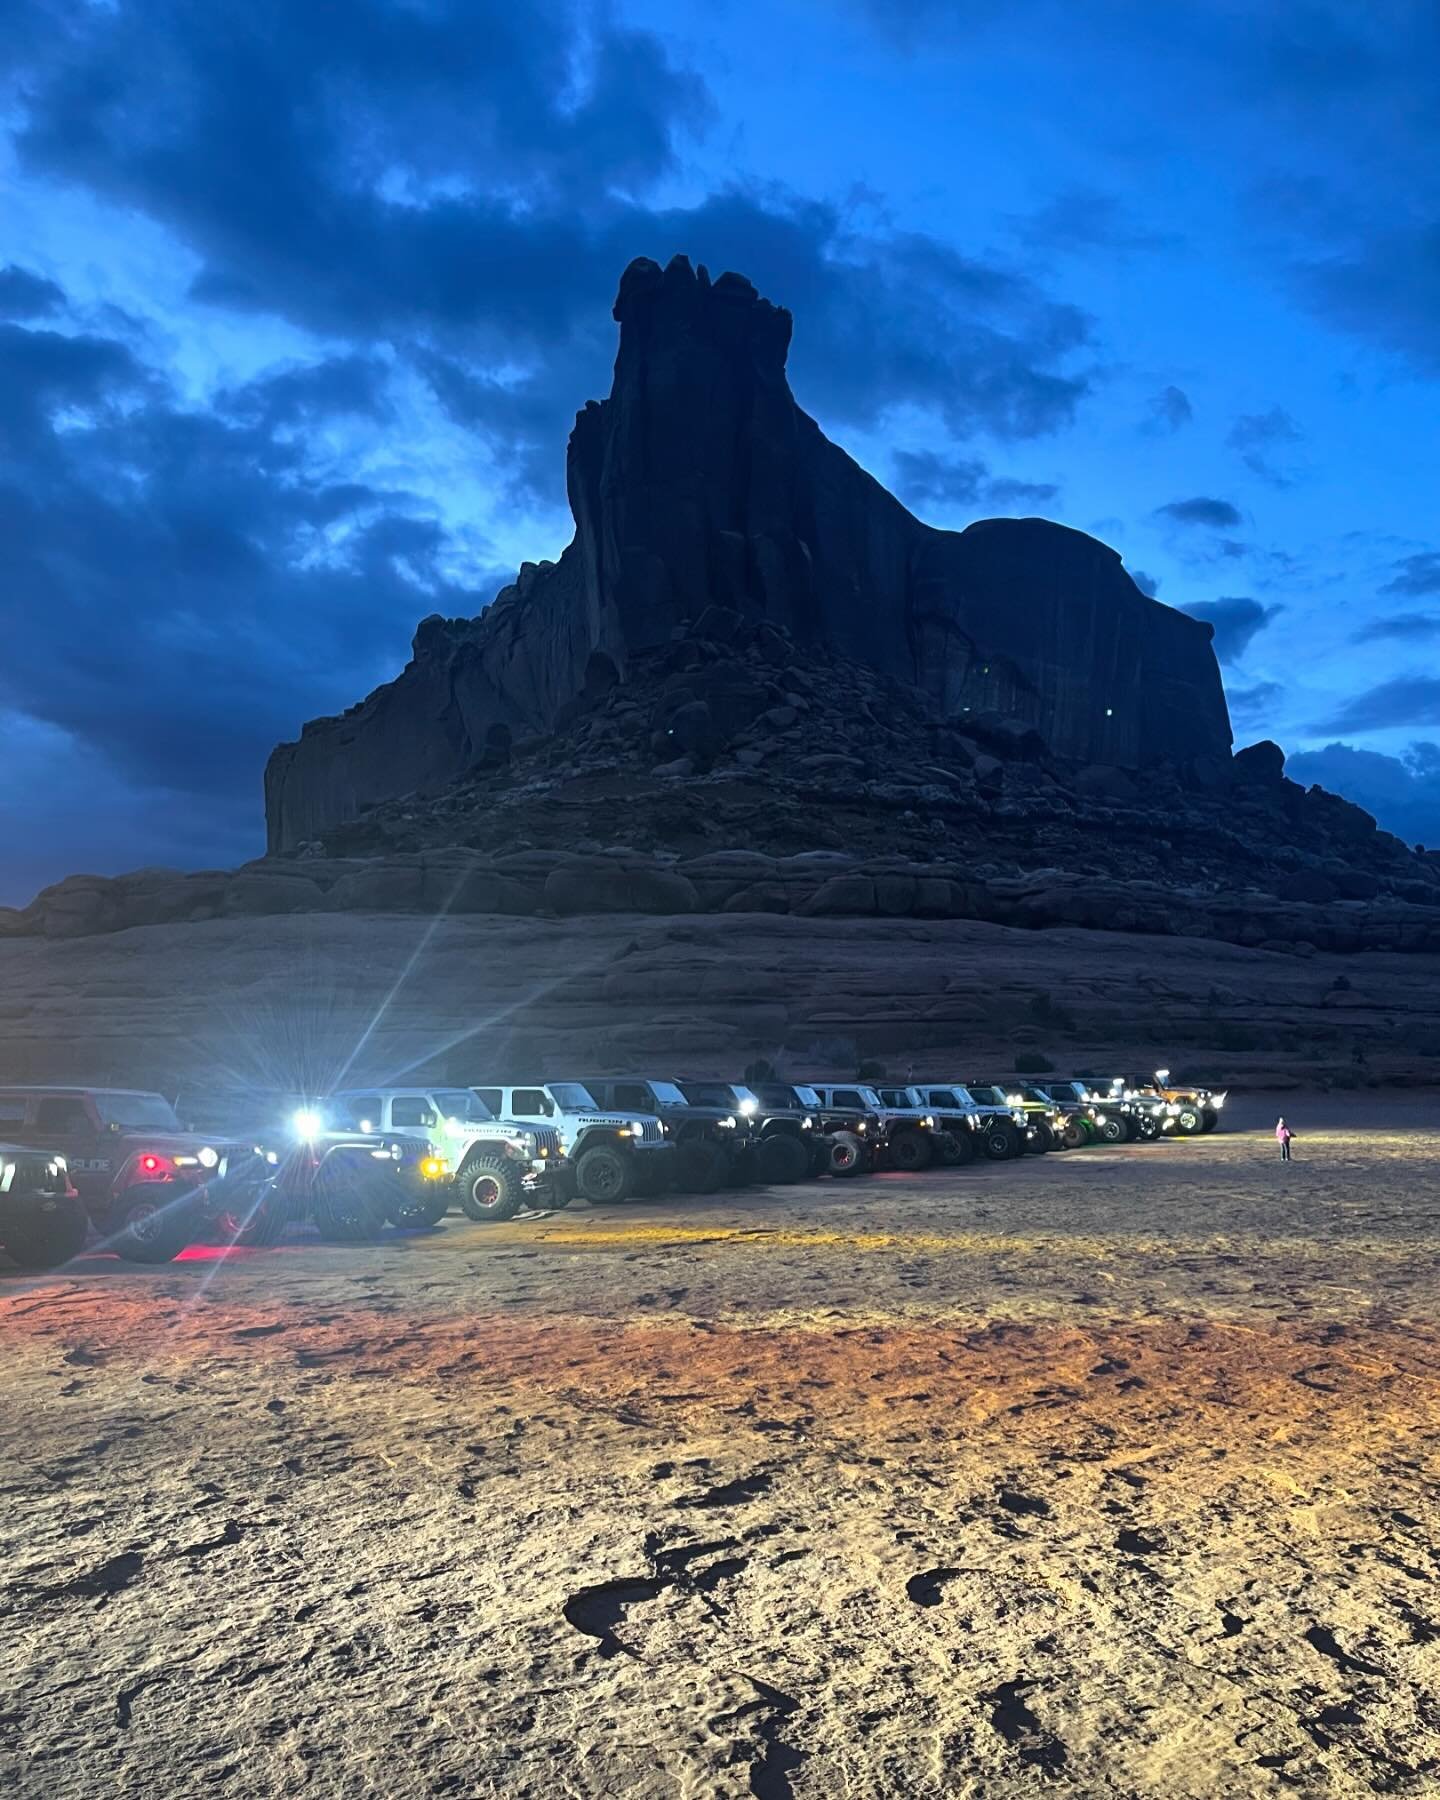 SEMA Joins Treadlightly! for Off-Roading Stewardship at Easter Jeep Safari - Line of Jeeps in the desert just after sunset.